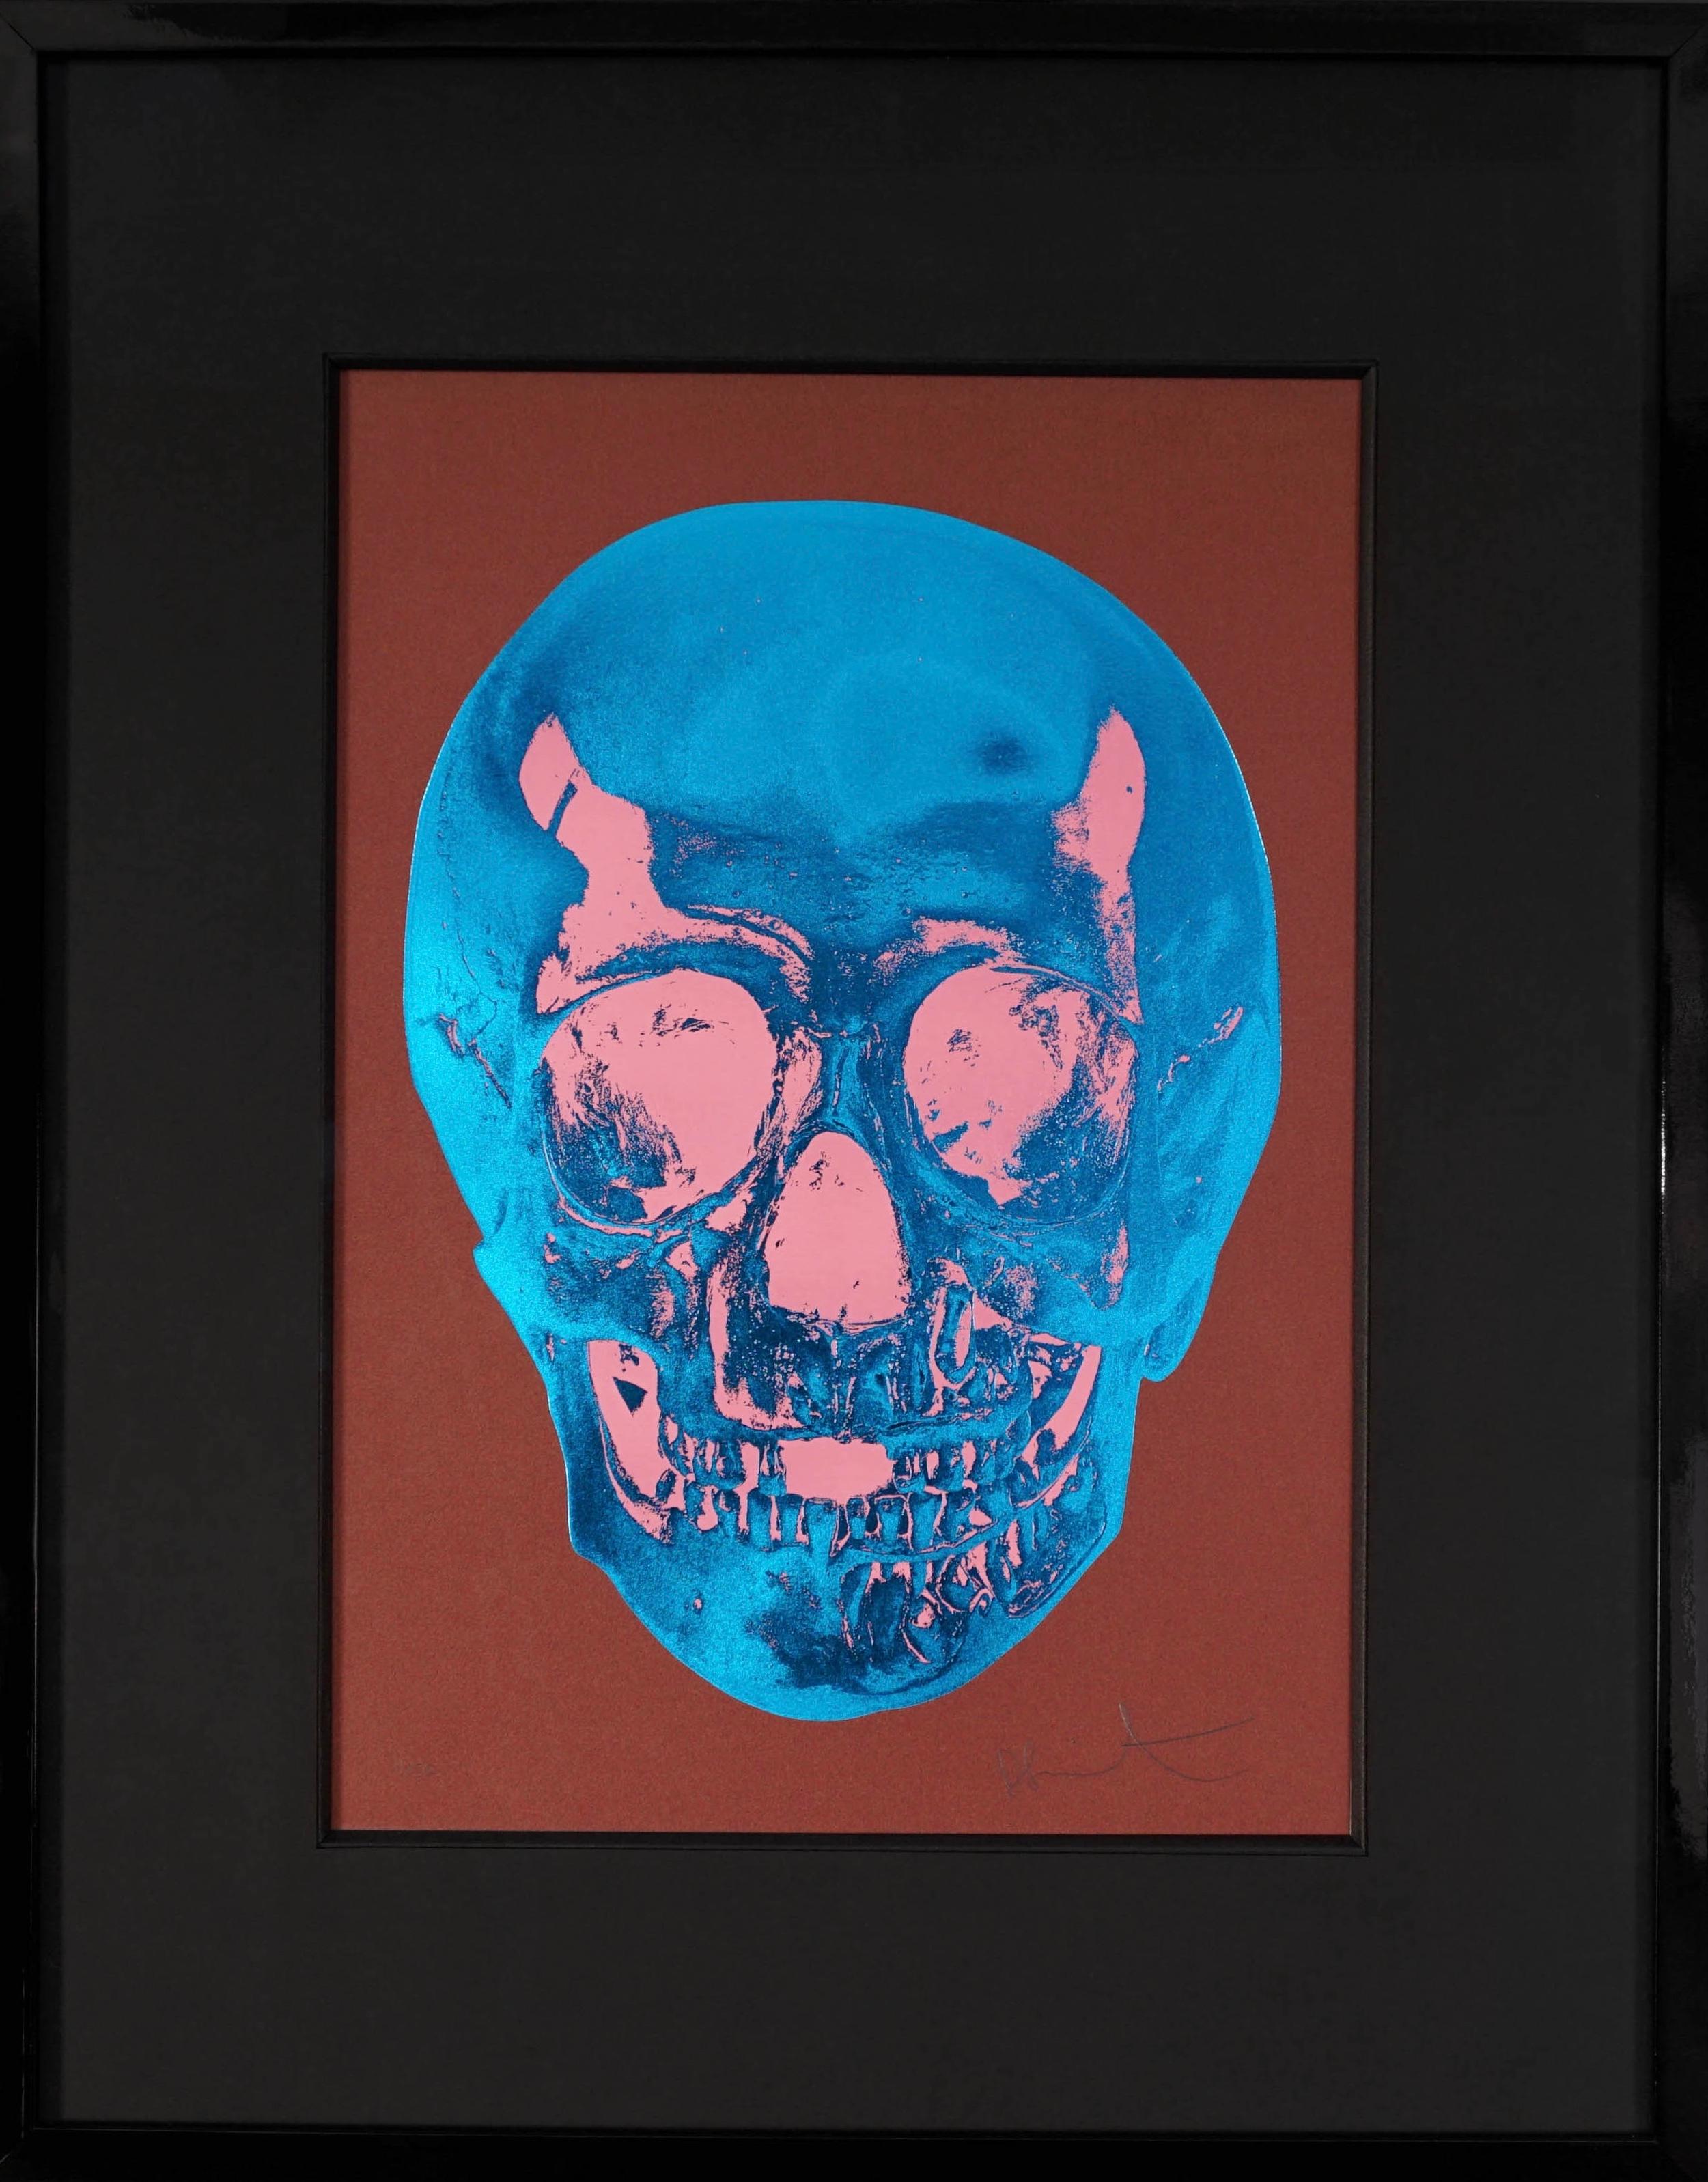 The ‘Till Death Do Us Part Skull in brown and cobalt blue is by master contemporary artist, Damien Hirst. This 2012 skull series is created in a small edition of only 50 pieces, each signed and numbered by the artist in pencil on the lower right